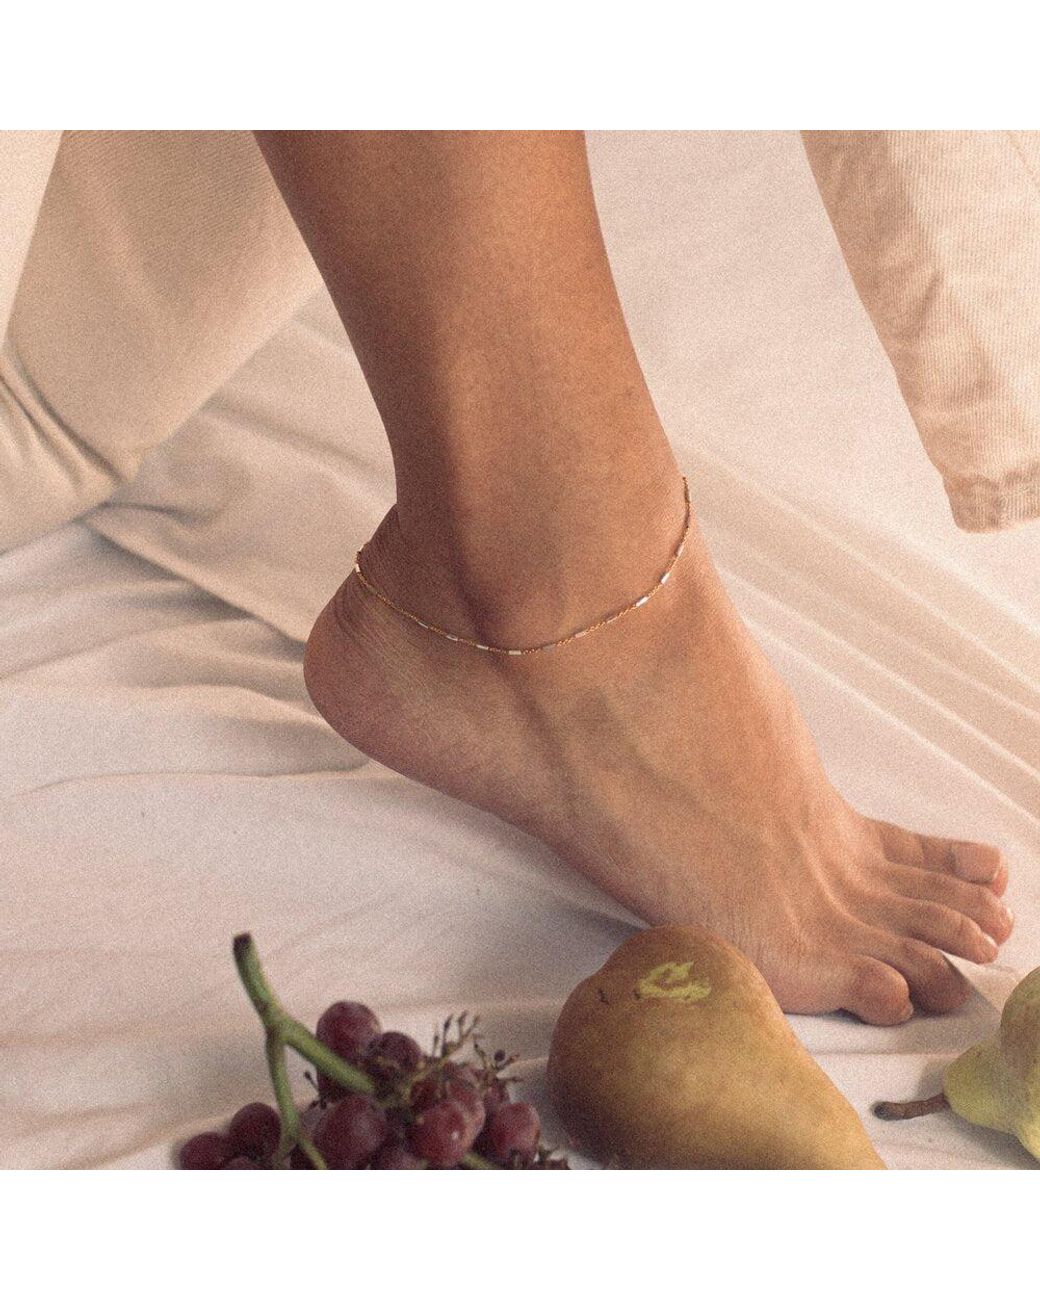 Quill Fine Jewelry Noe Gold Bar Chain Anklet in White | Lyst